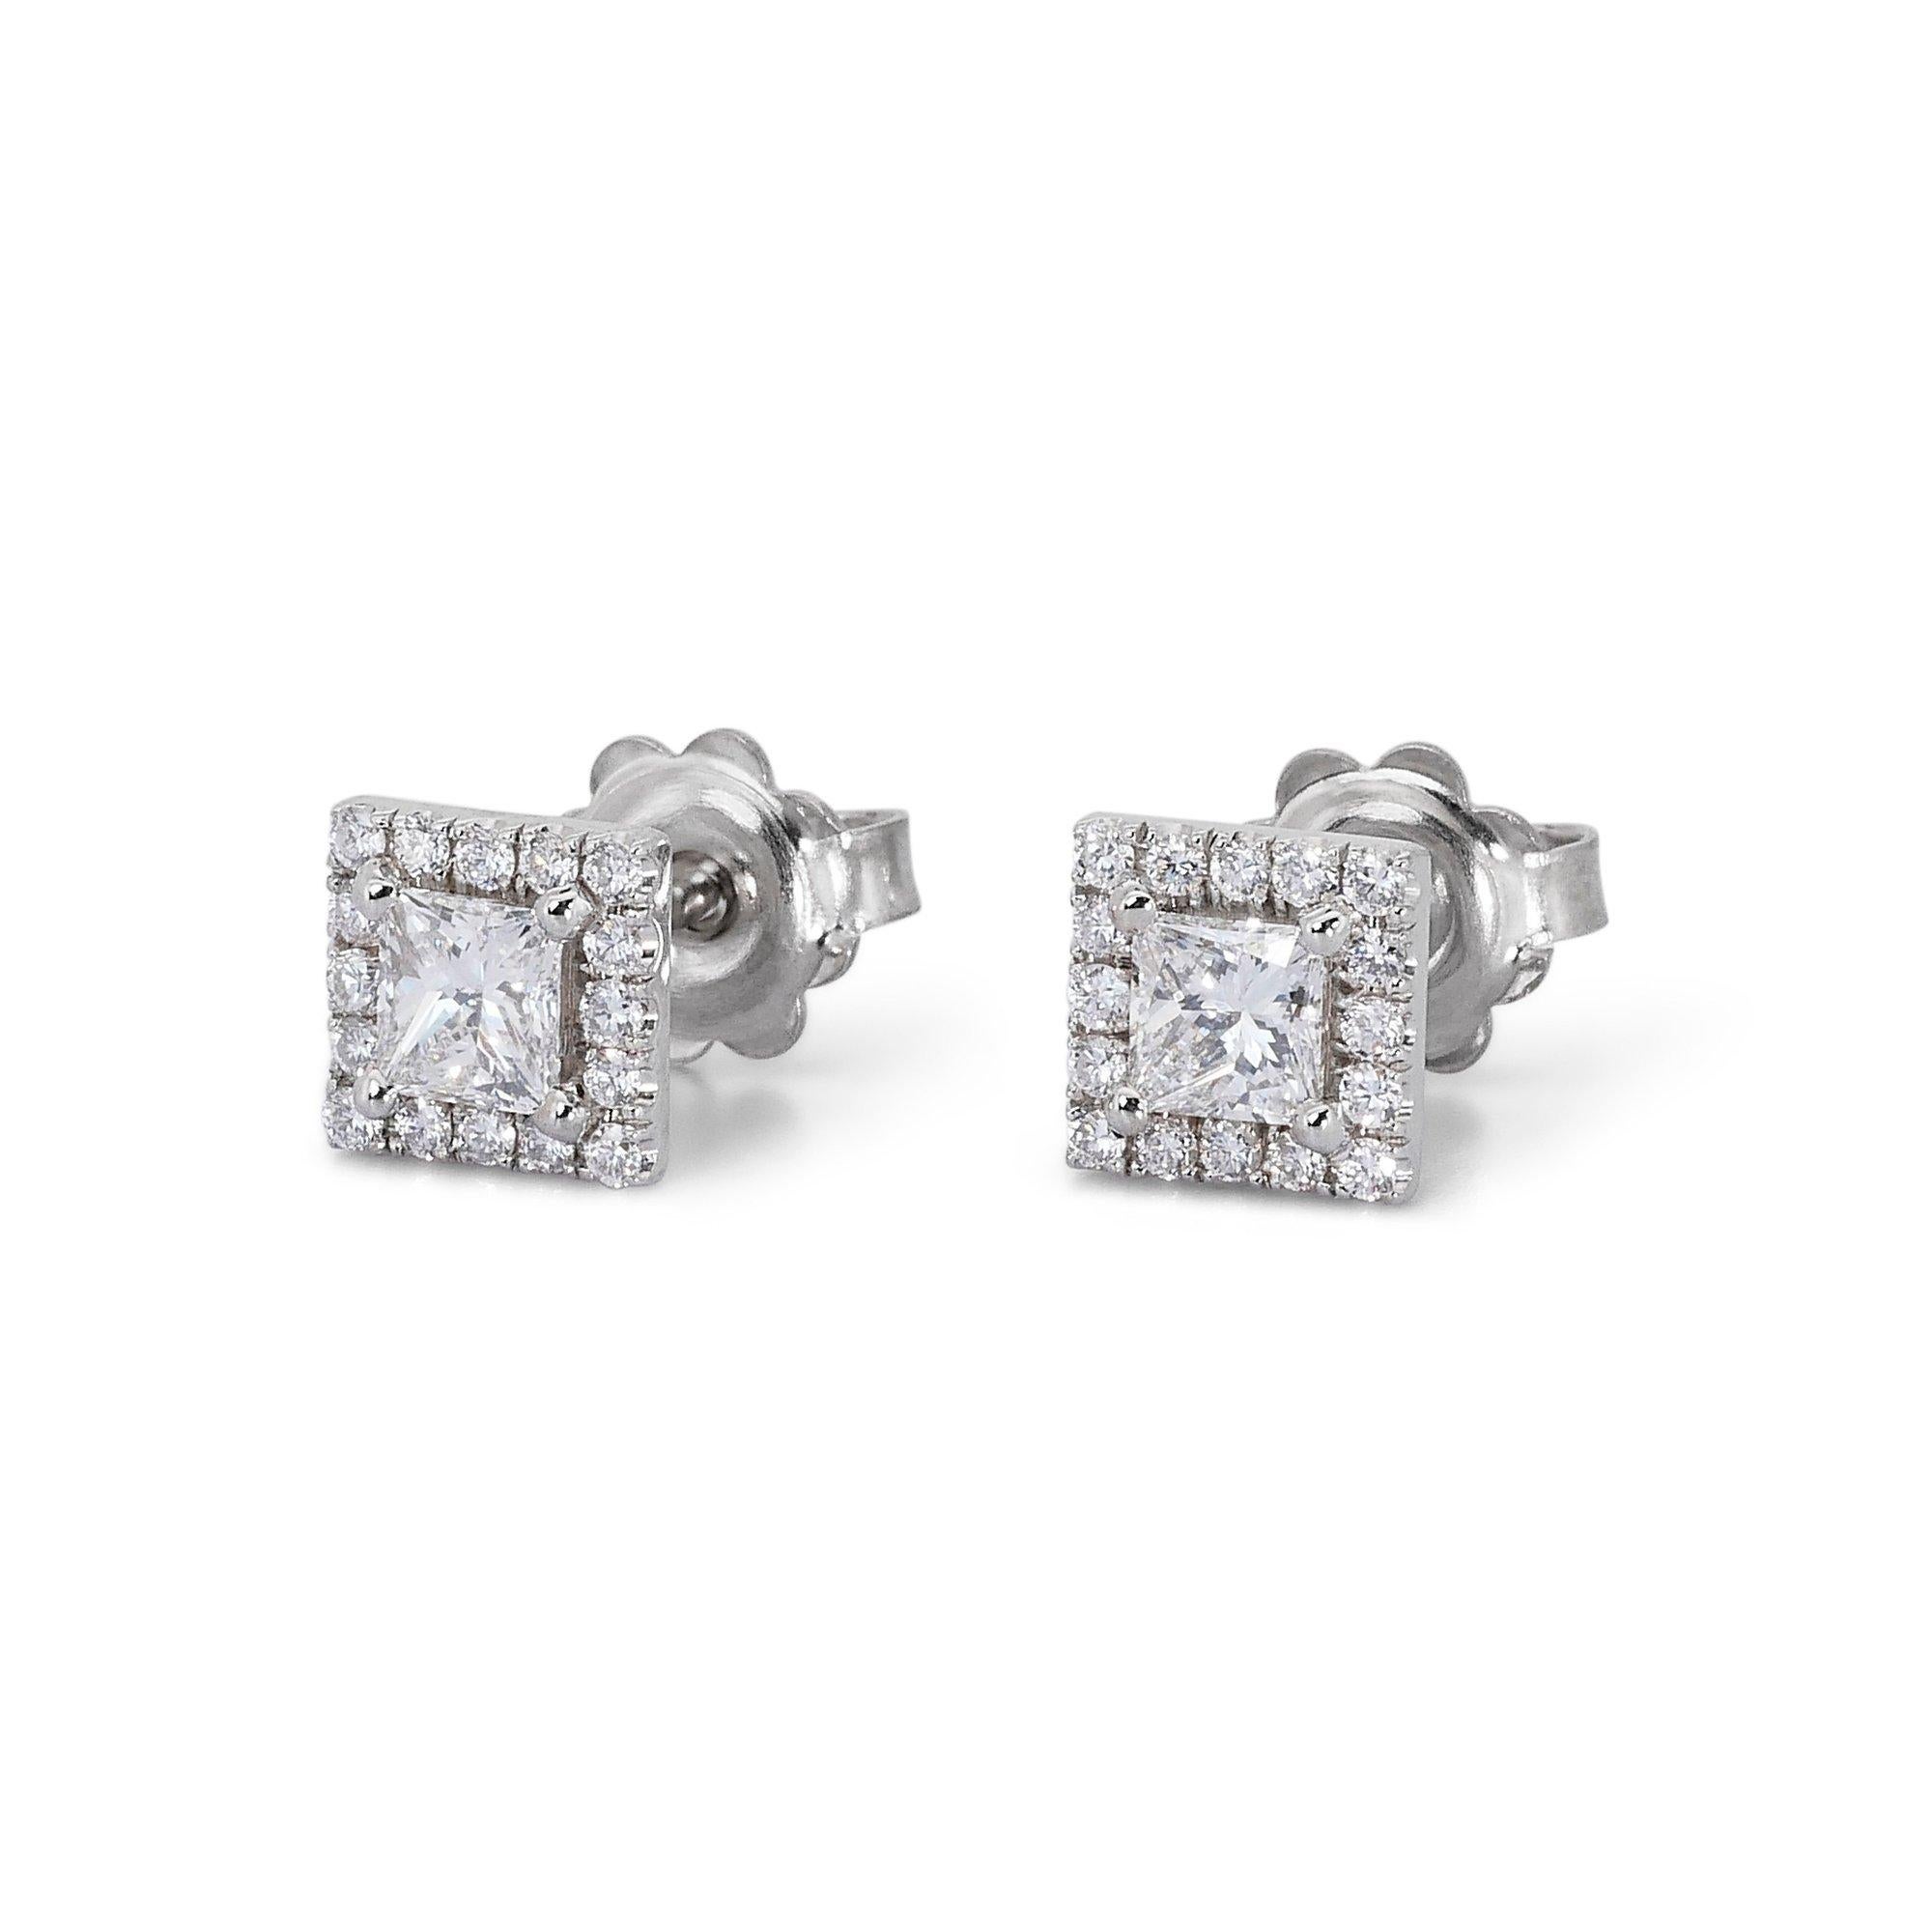 Enchanting 1.33ct Diamond Halo Stud Earrings in 18k White Gold - GIA Certified 

These captivating earrings showcase a stunning duo of 1.01-carat, square-cut diamonds. The brilliance of the center stones is further emphasized by a halo of 32